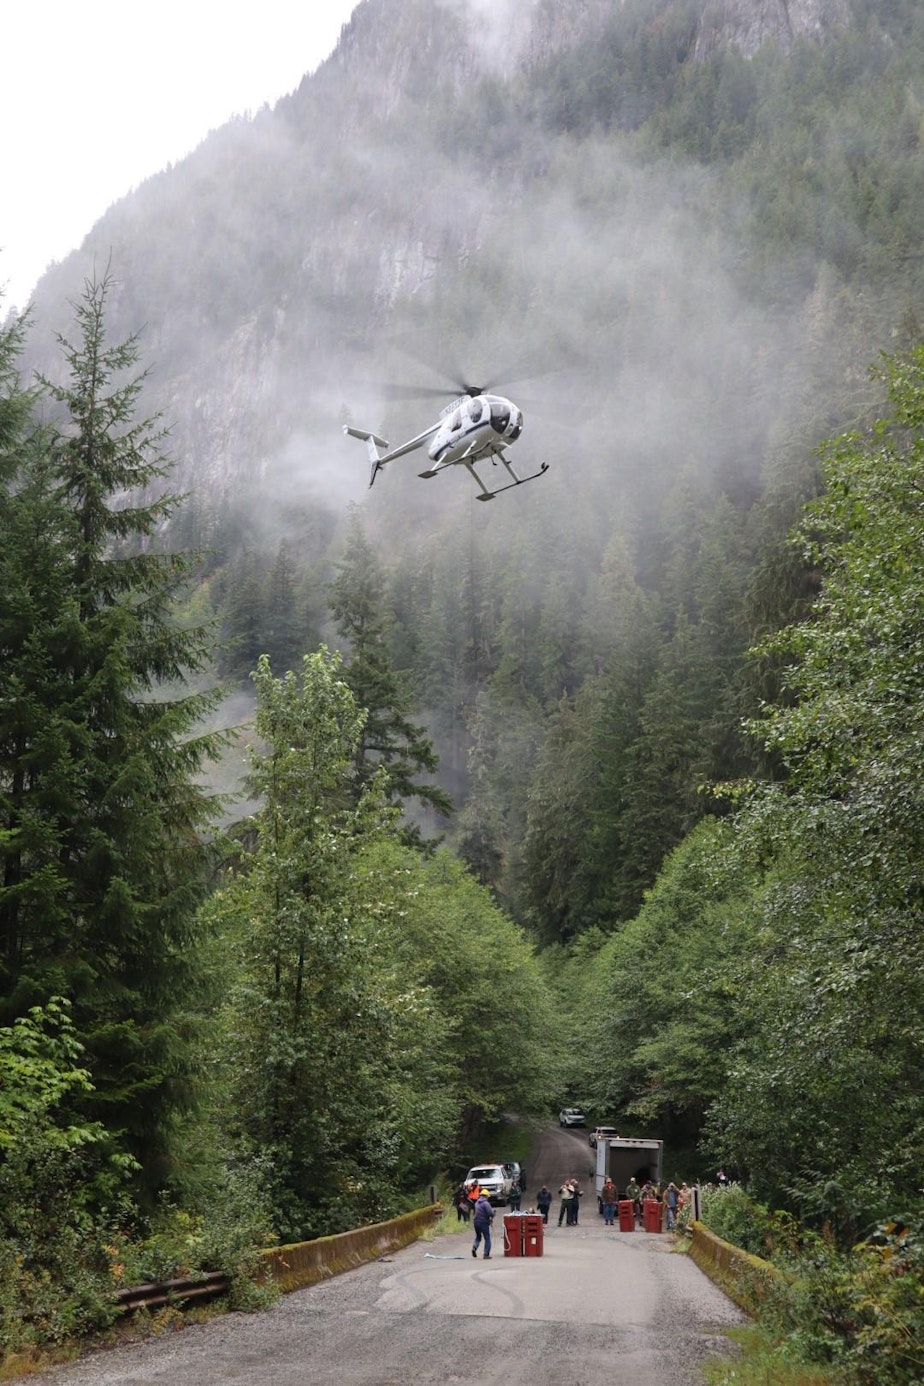 caption: A chartered helicopter carried mountain goats captured the day before in Olympic National Park to their new home on the slopes of Stillaguamish Peak.